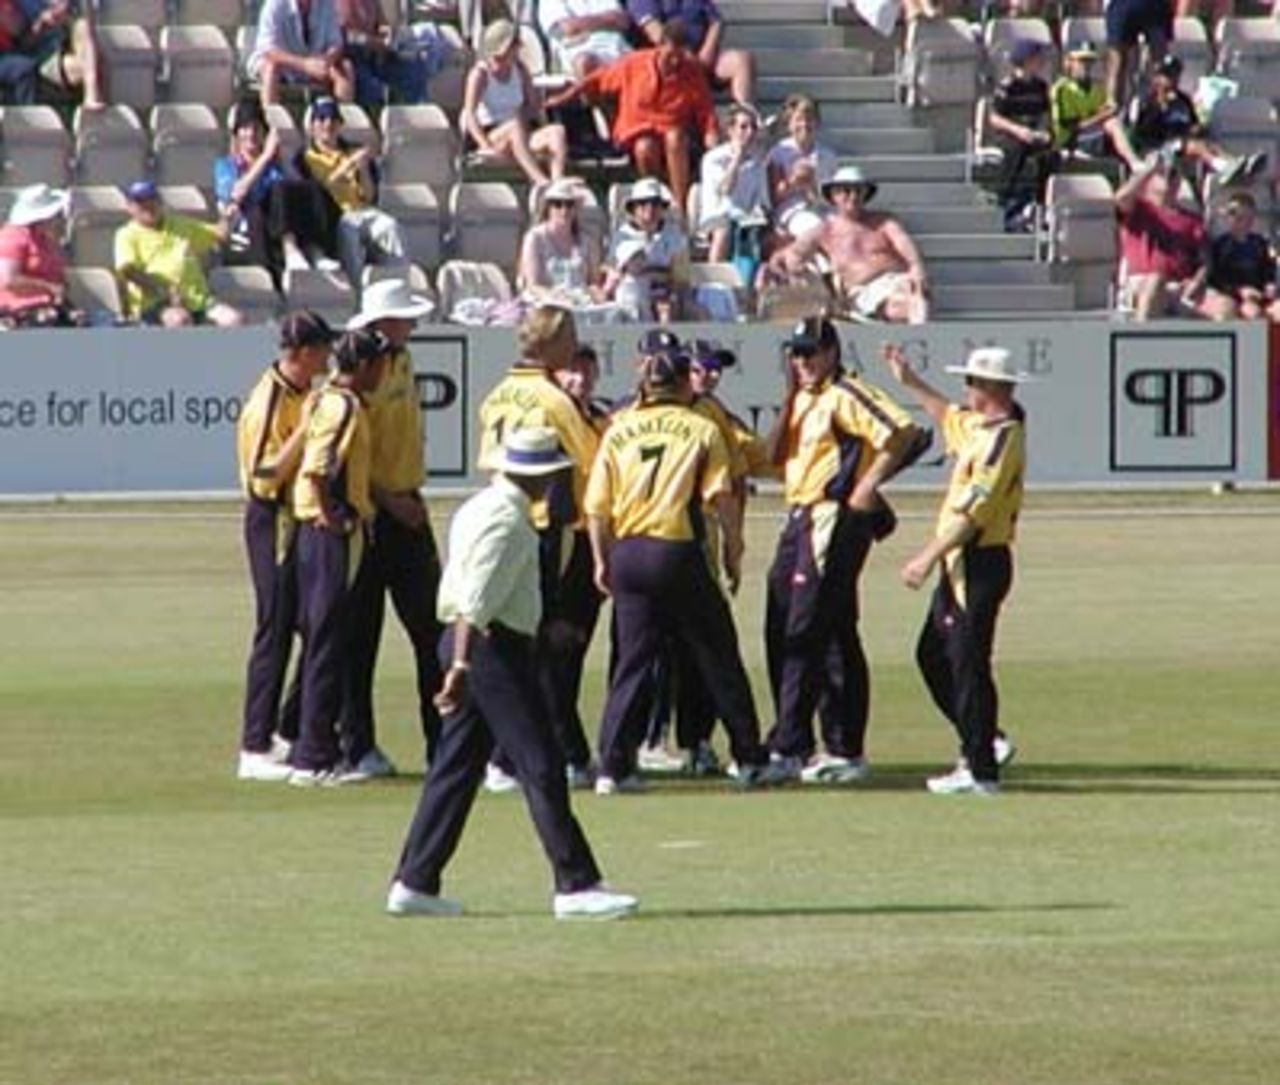 Hampshire players mob Alan Mullally after he takes stunning catch.